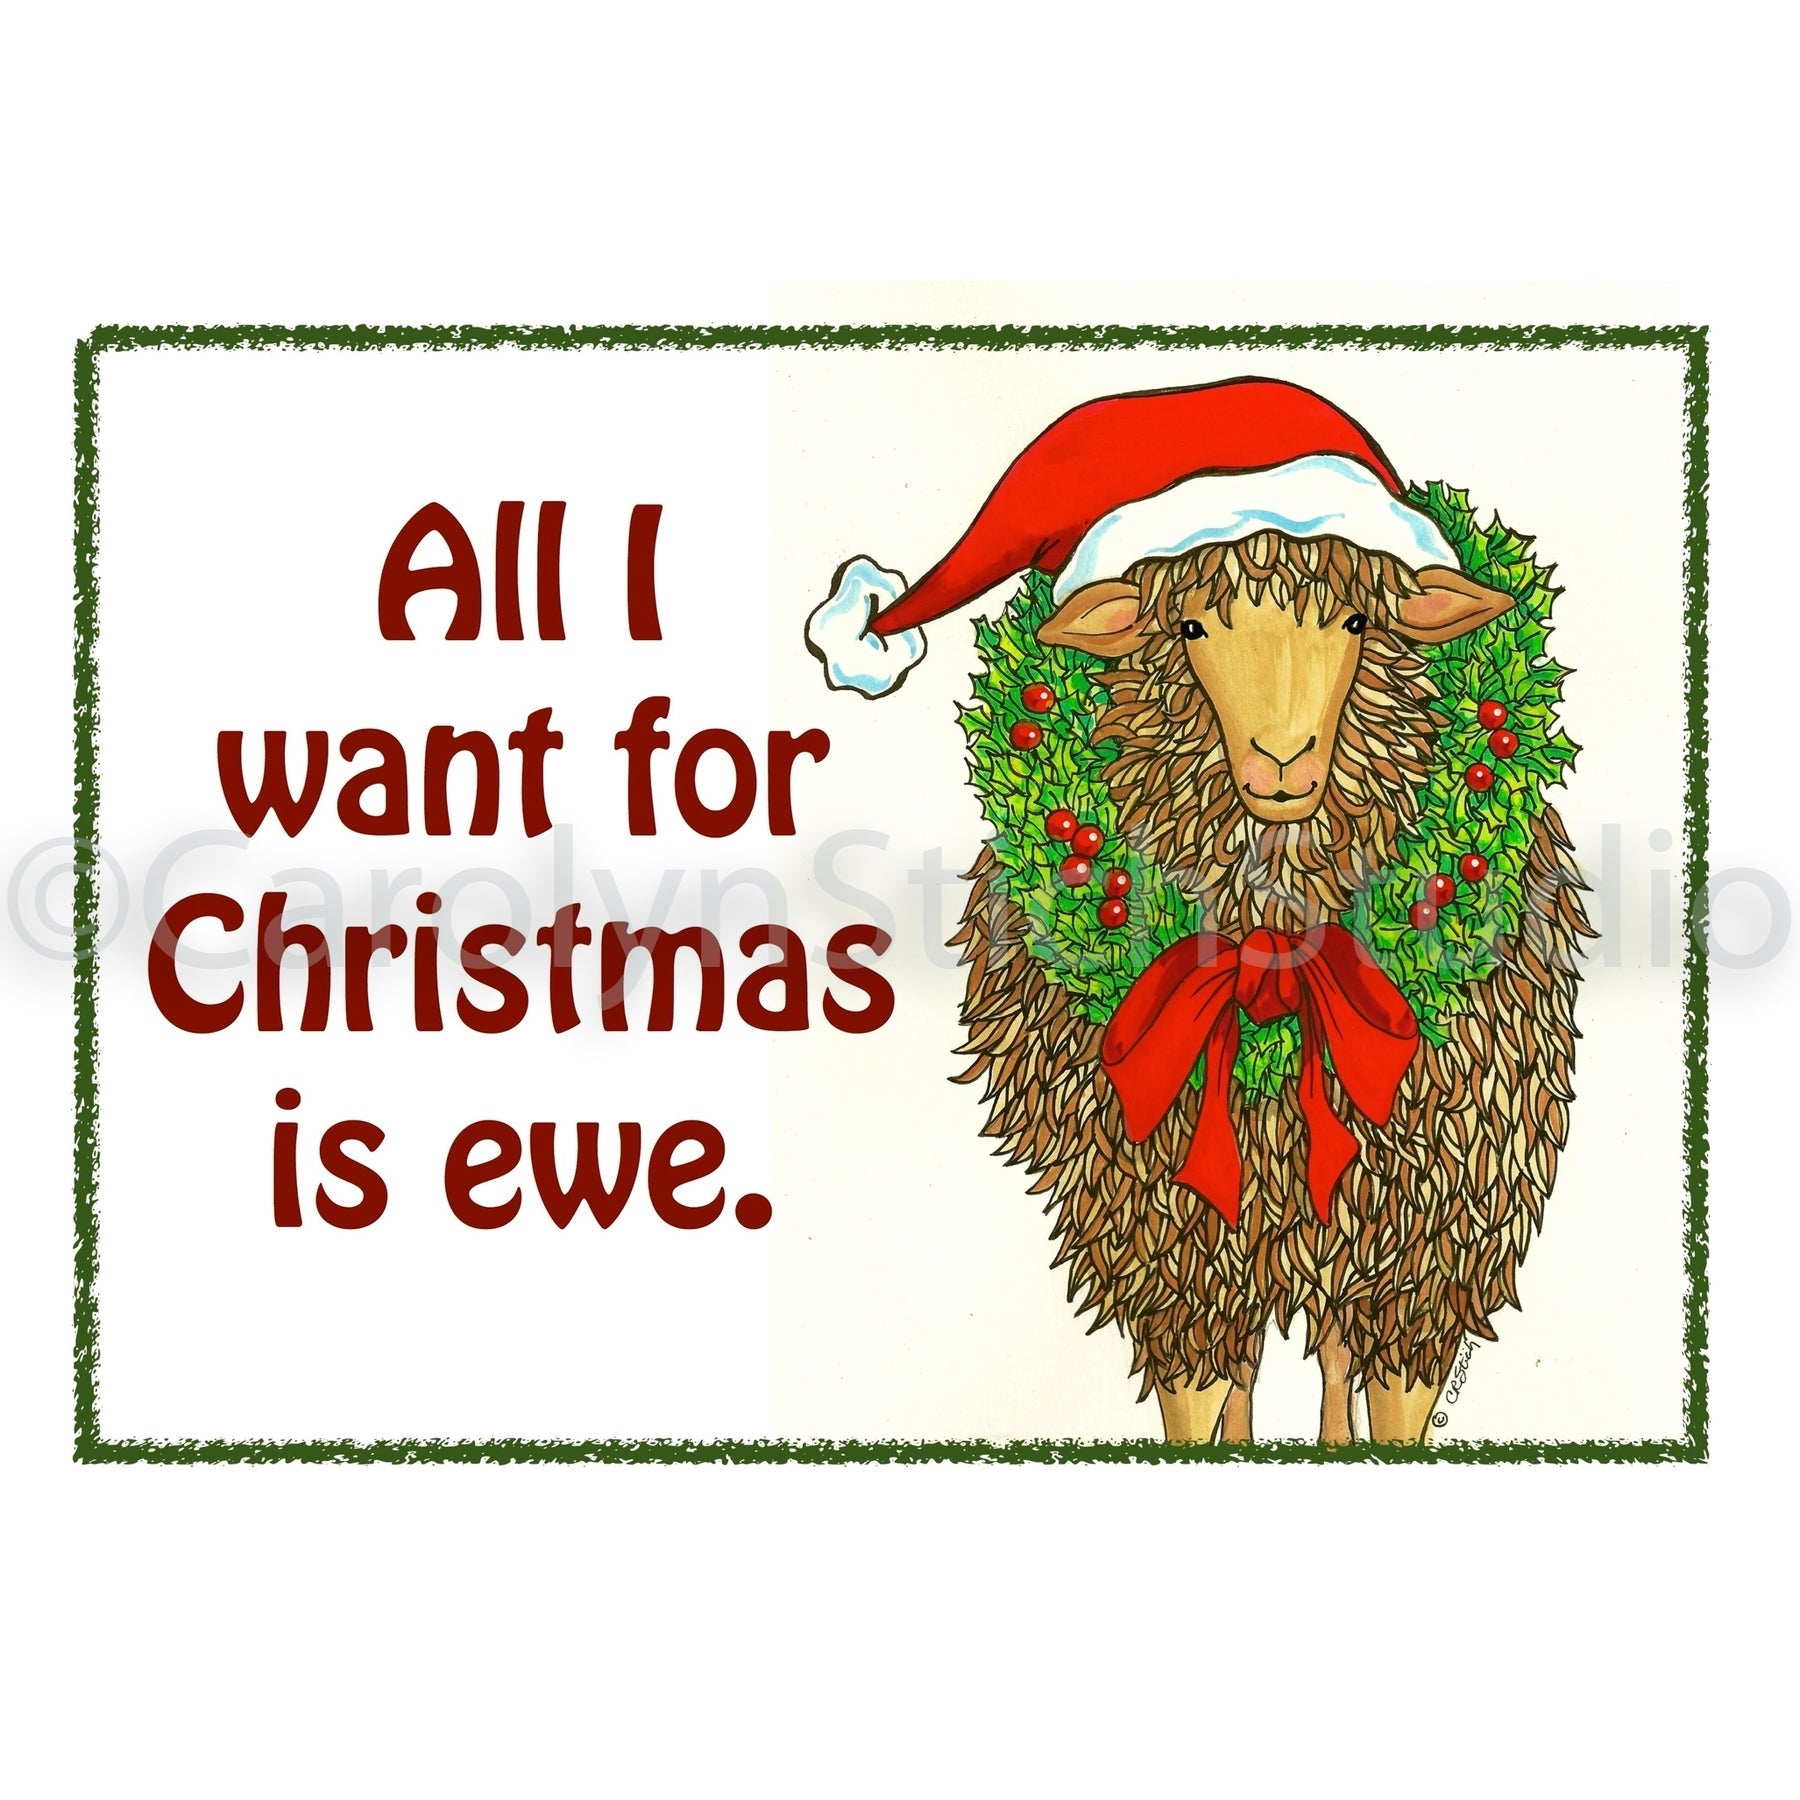 All I Want for Christmas is Ewe, rug hooking pattern